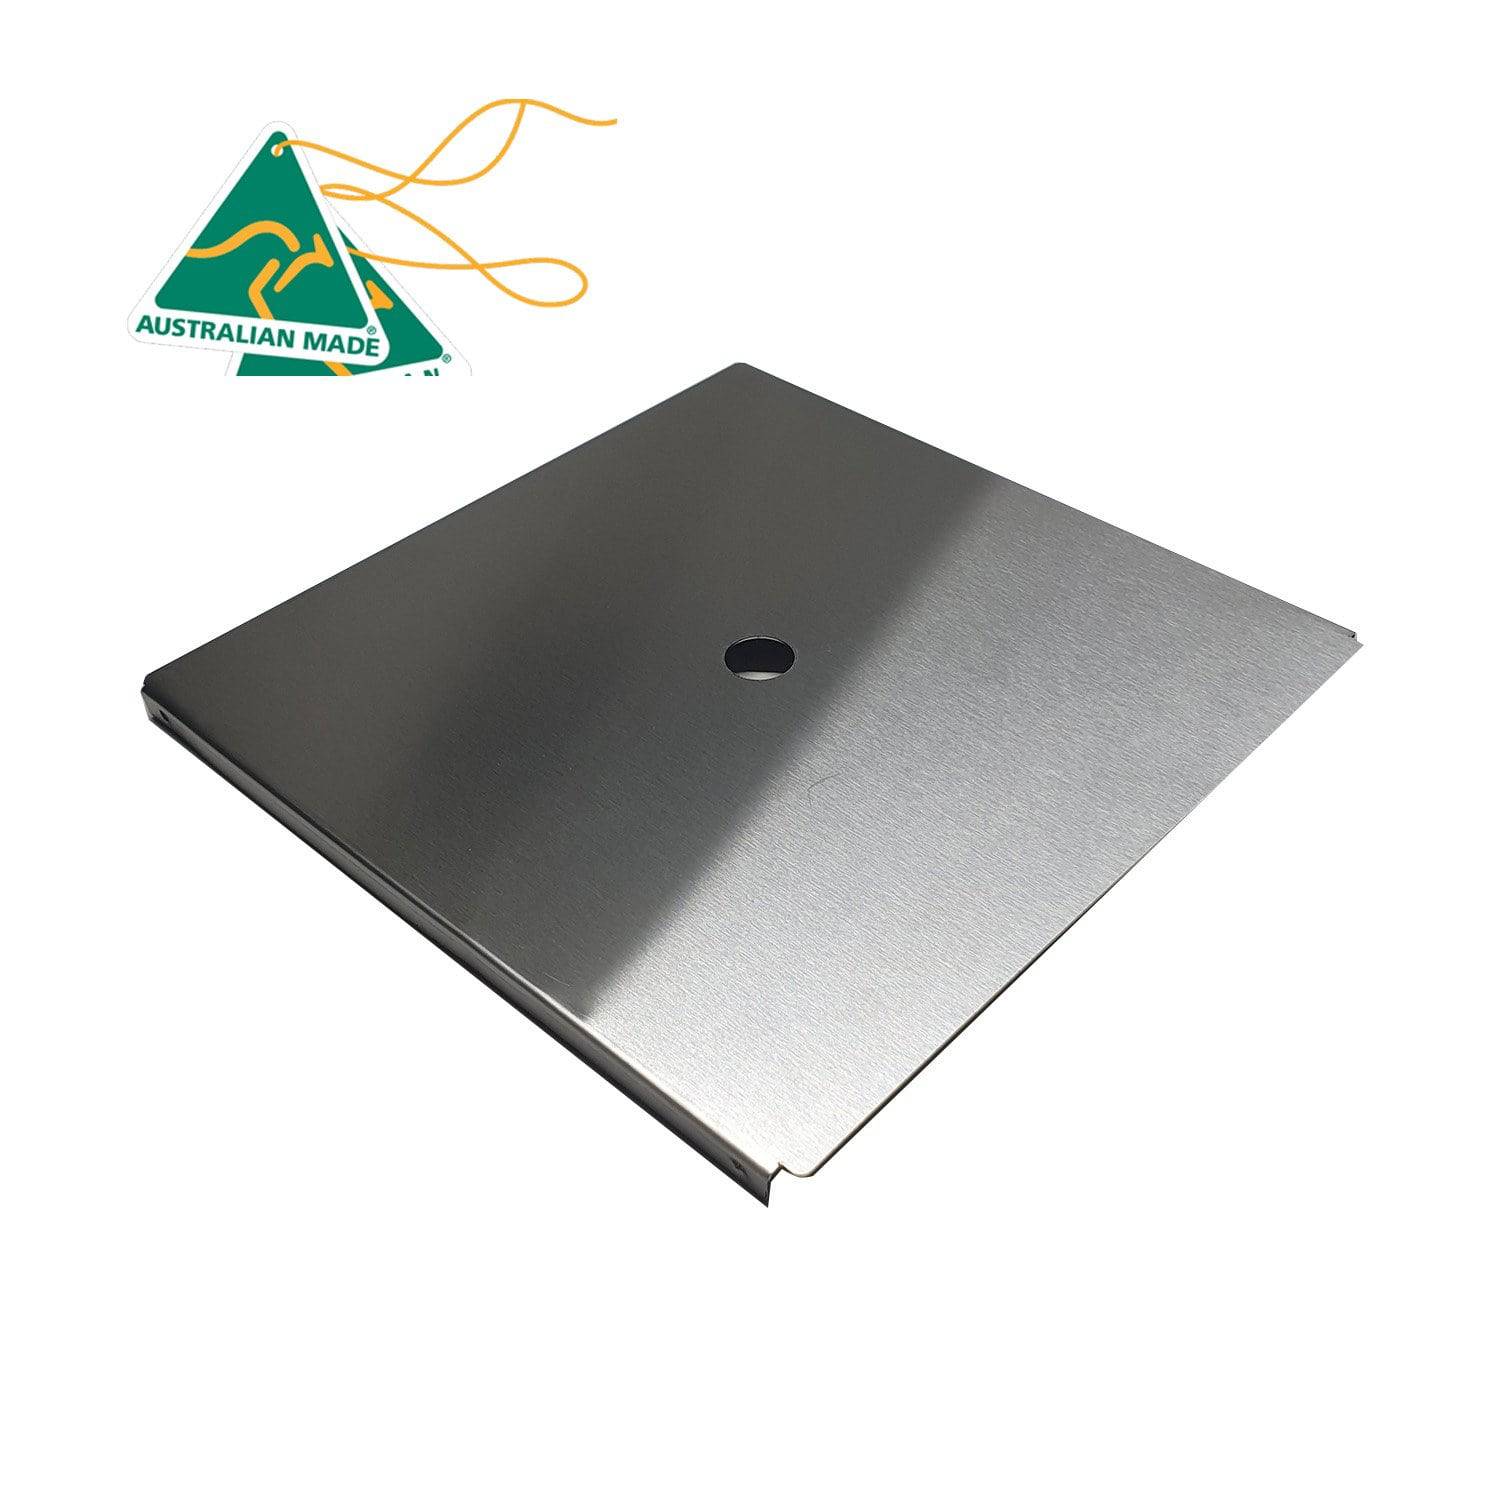 SMW Lid to suit Deep Oven Tray for Travel Buddy Marine | Somerville Metal Works